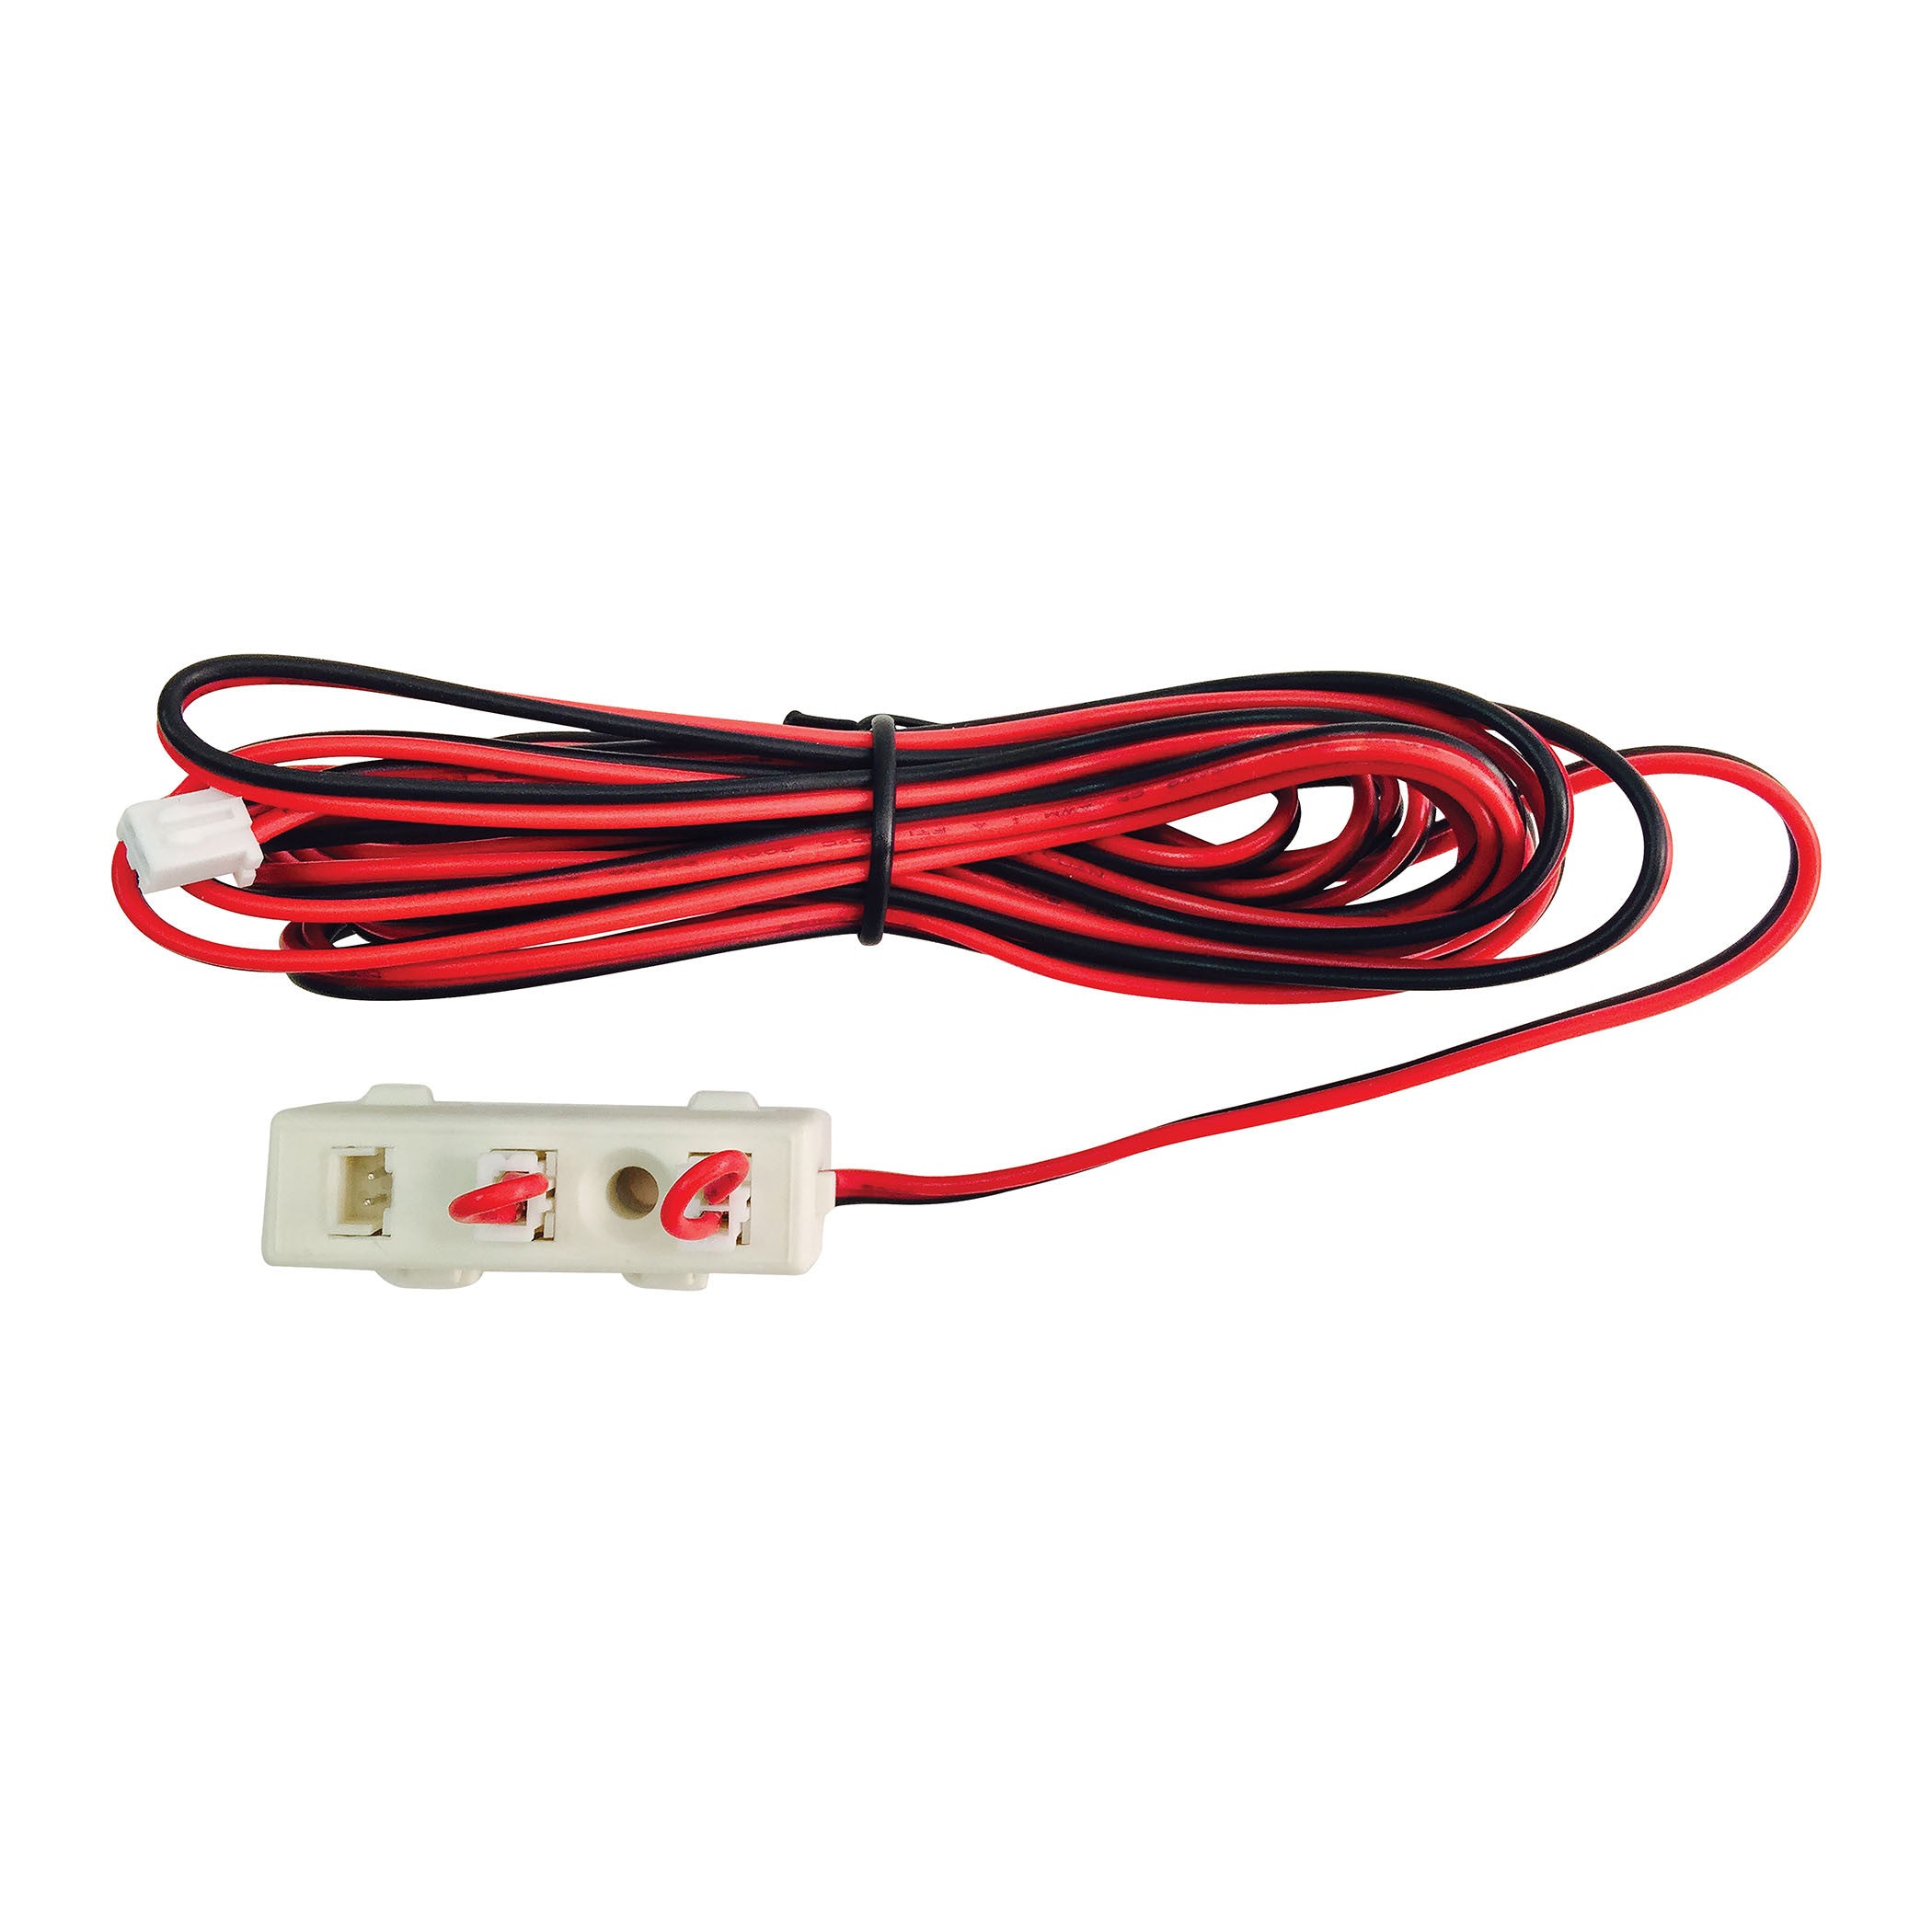 Alico Ac9-3-3 10-foot Harness With 3 Ports